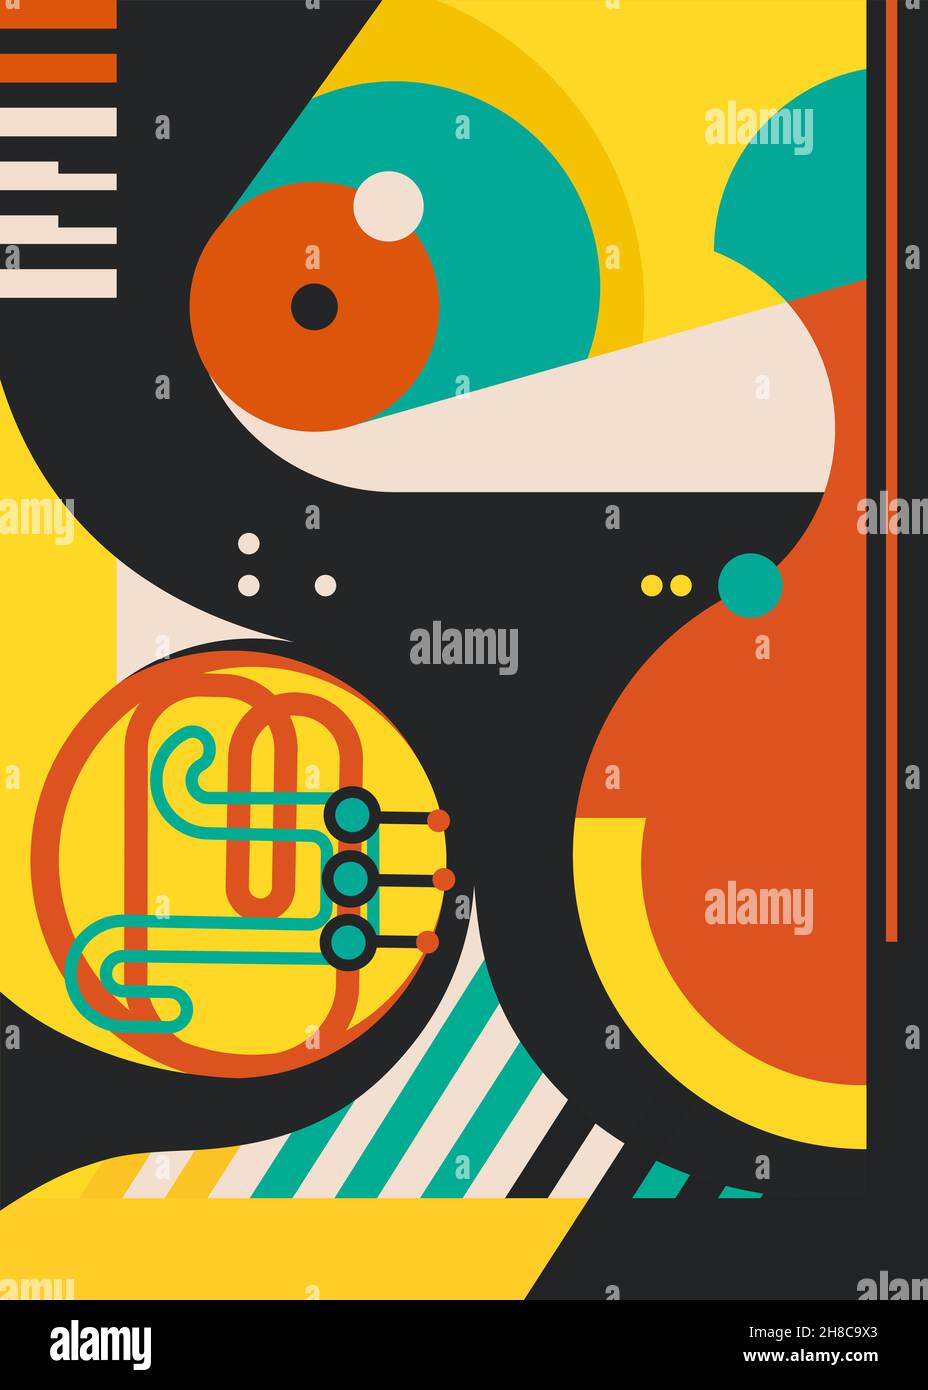 Poster with abstract music instruments. Creative placard design in flat style. Stock Vector